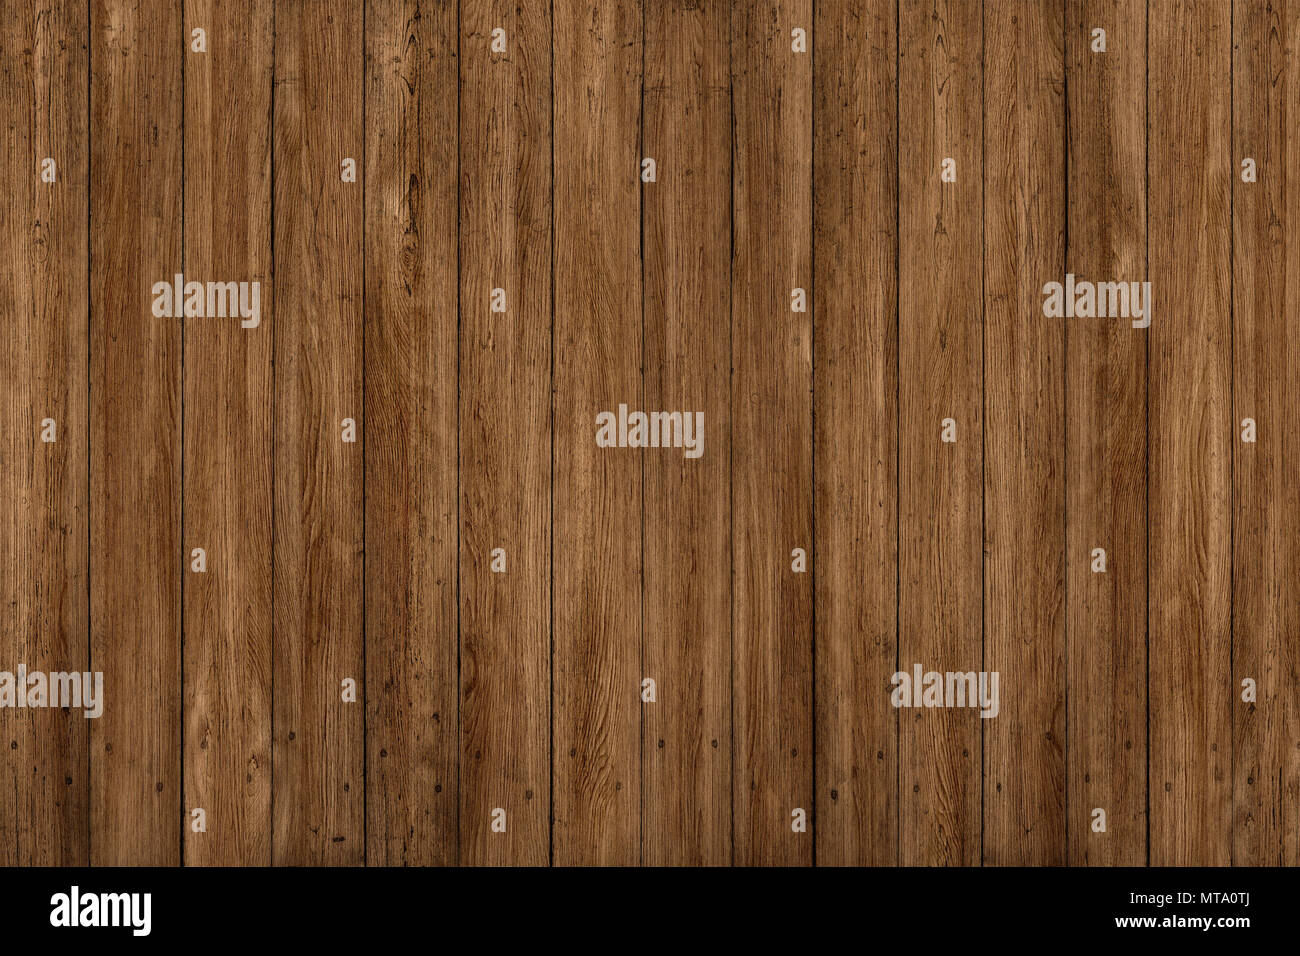 grunge wood panels, wooden texture background wall Stock Photo